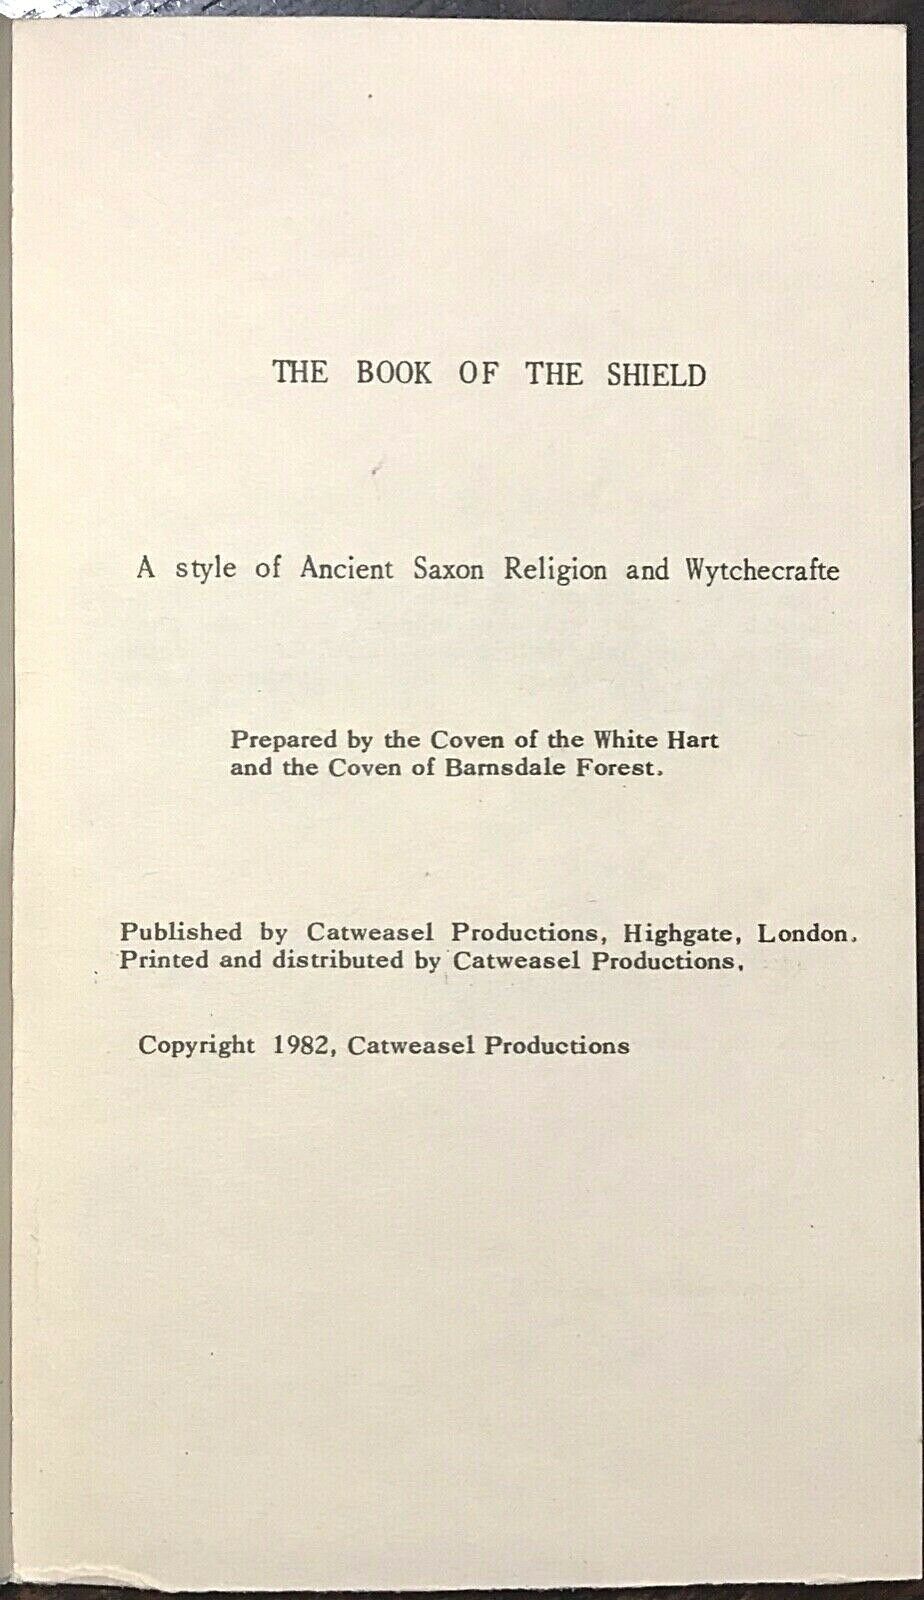 BOOK OF THE SHIELD: ANCIENT SAXON RELIGION, WITCHCRAFT - 1st + Ltd Ed, 1982